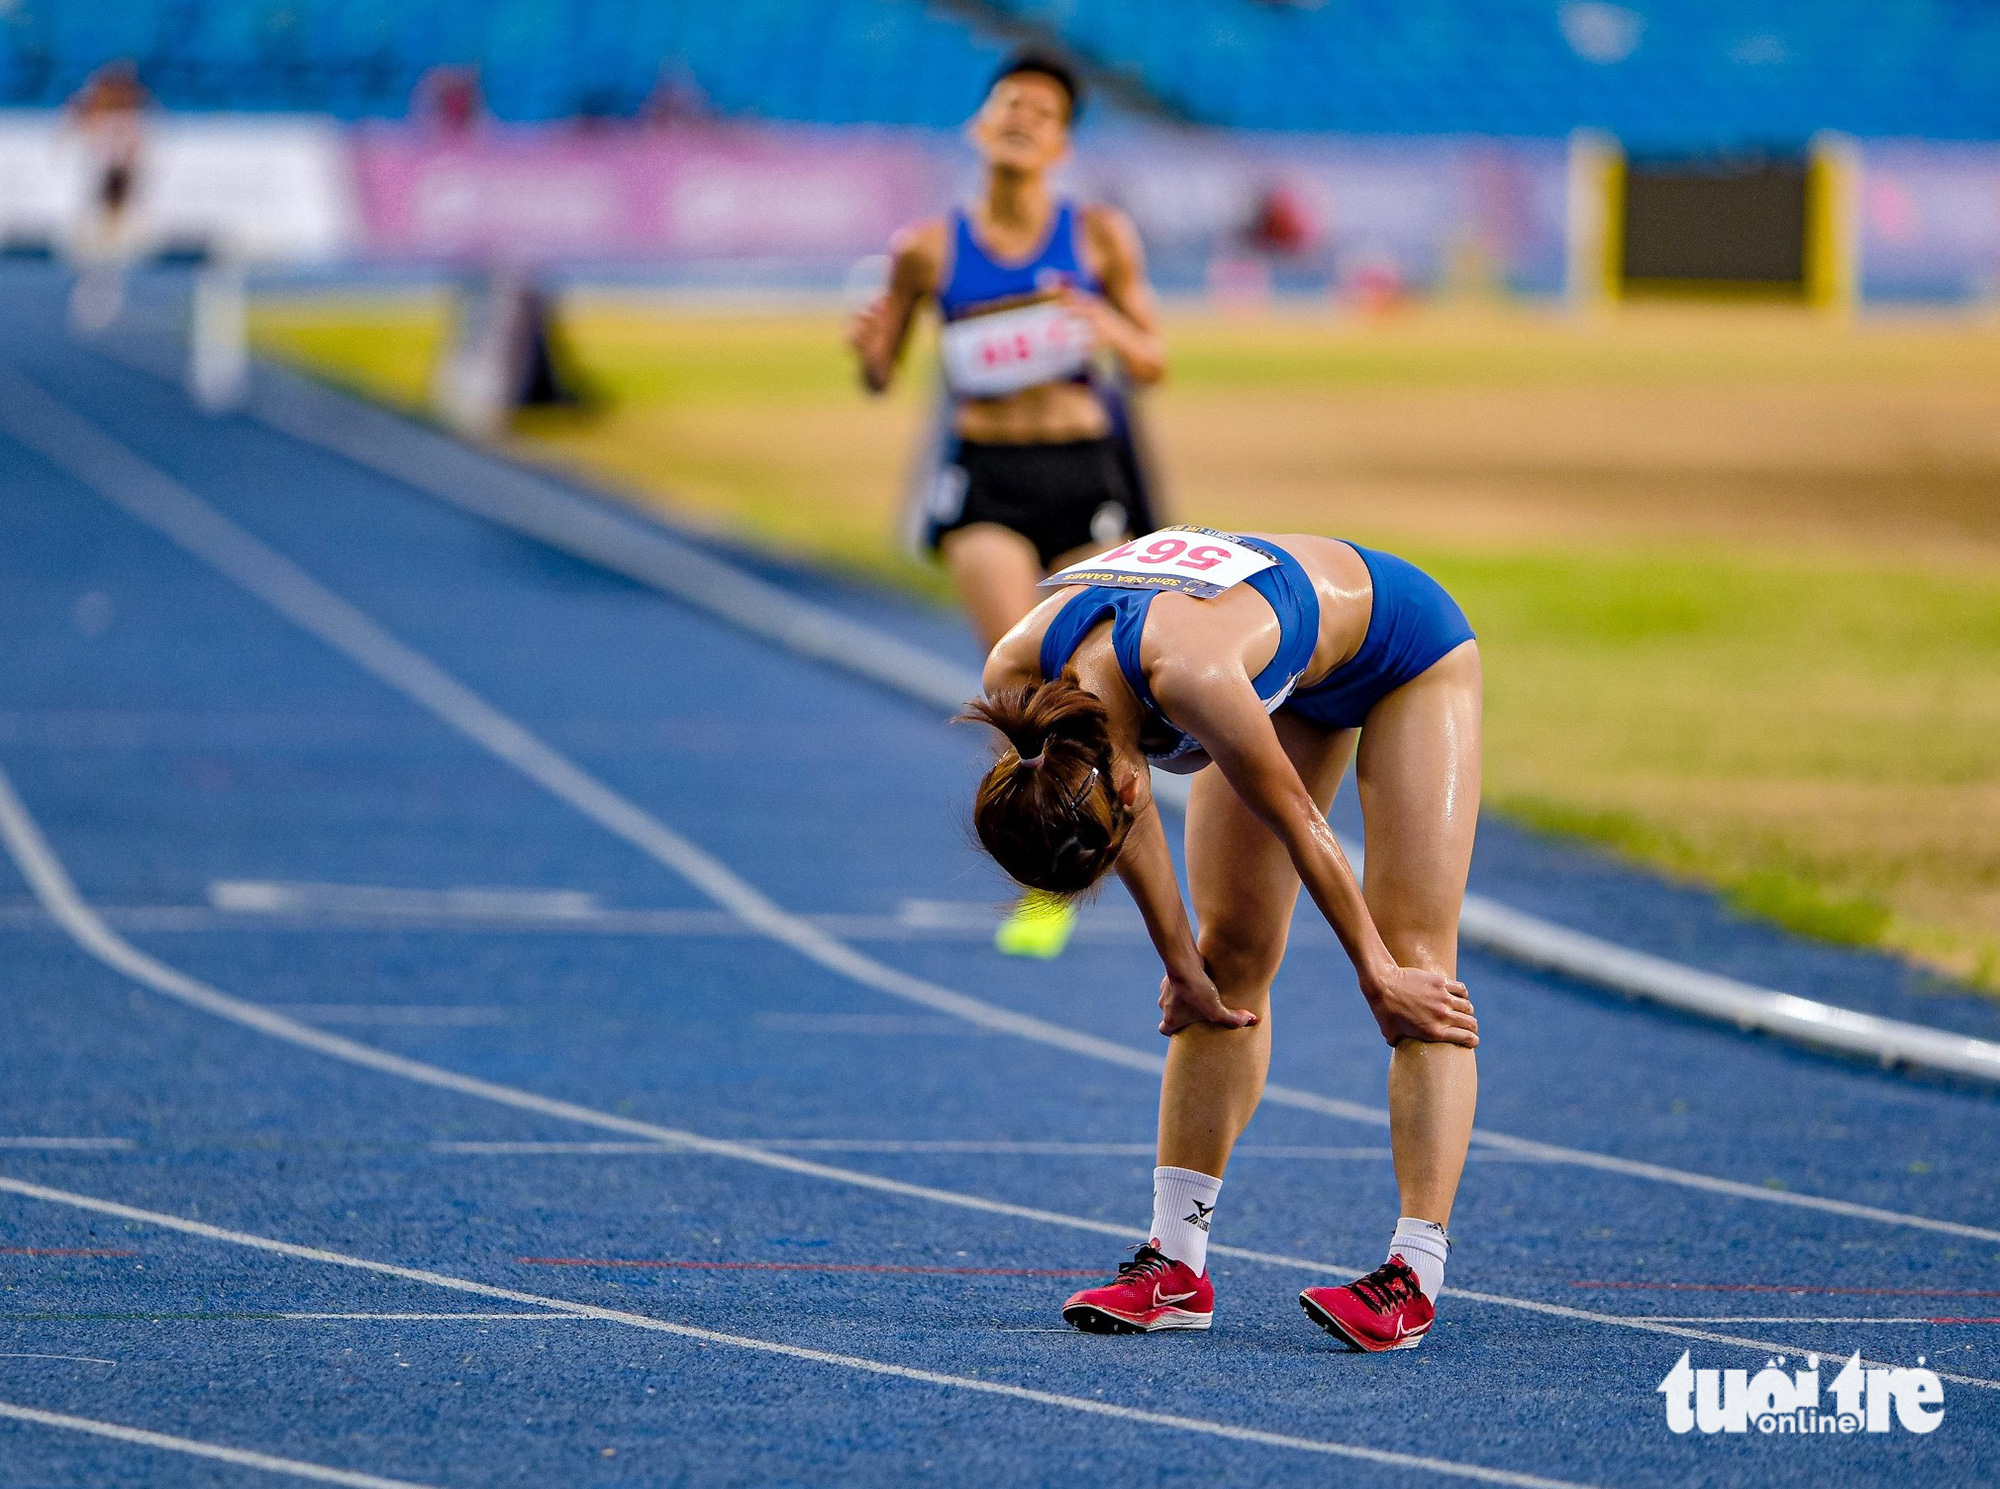 Vietnamese runner Nguyen Thi Oanh reacts after finishing first in women’s 3,000-meter hurdles at the 2023 Southeast Asian Games in Cambodia, May 9, 2023. Photo: Nam Tran / Tuoi Tre